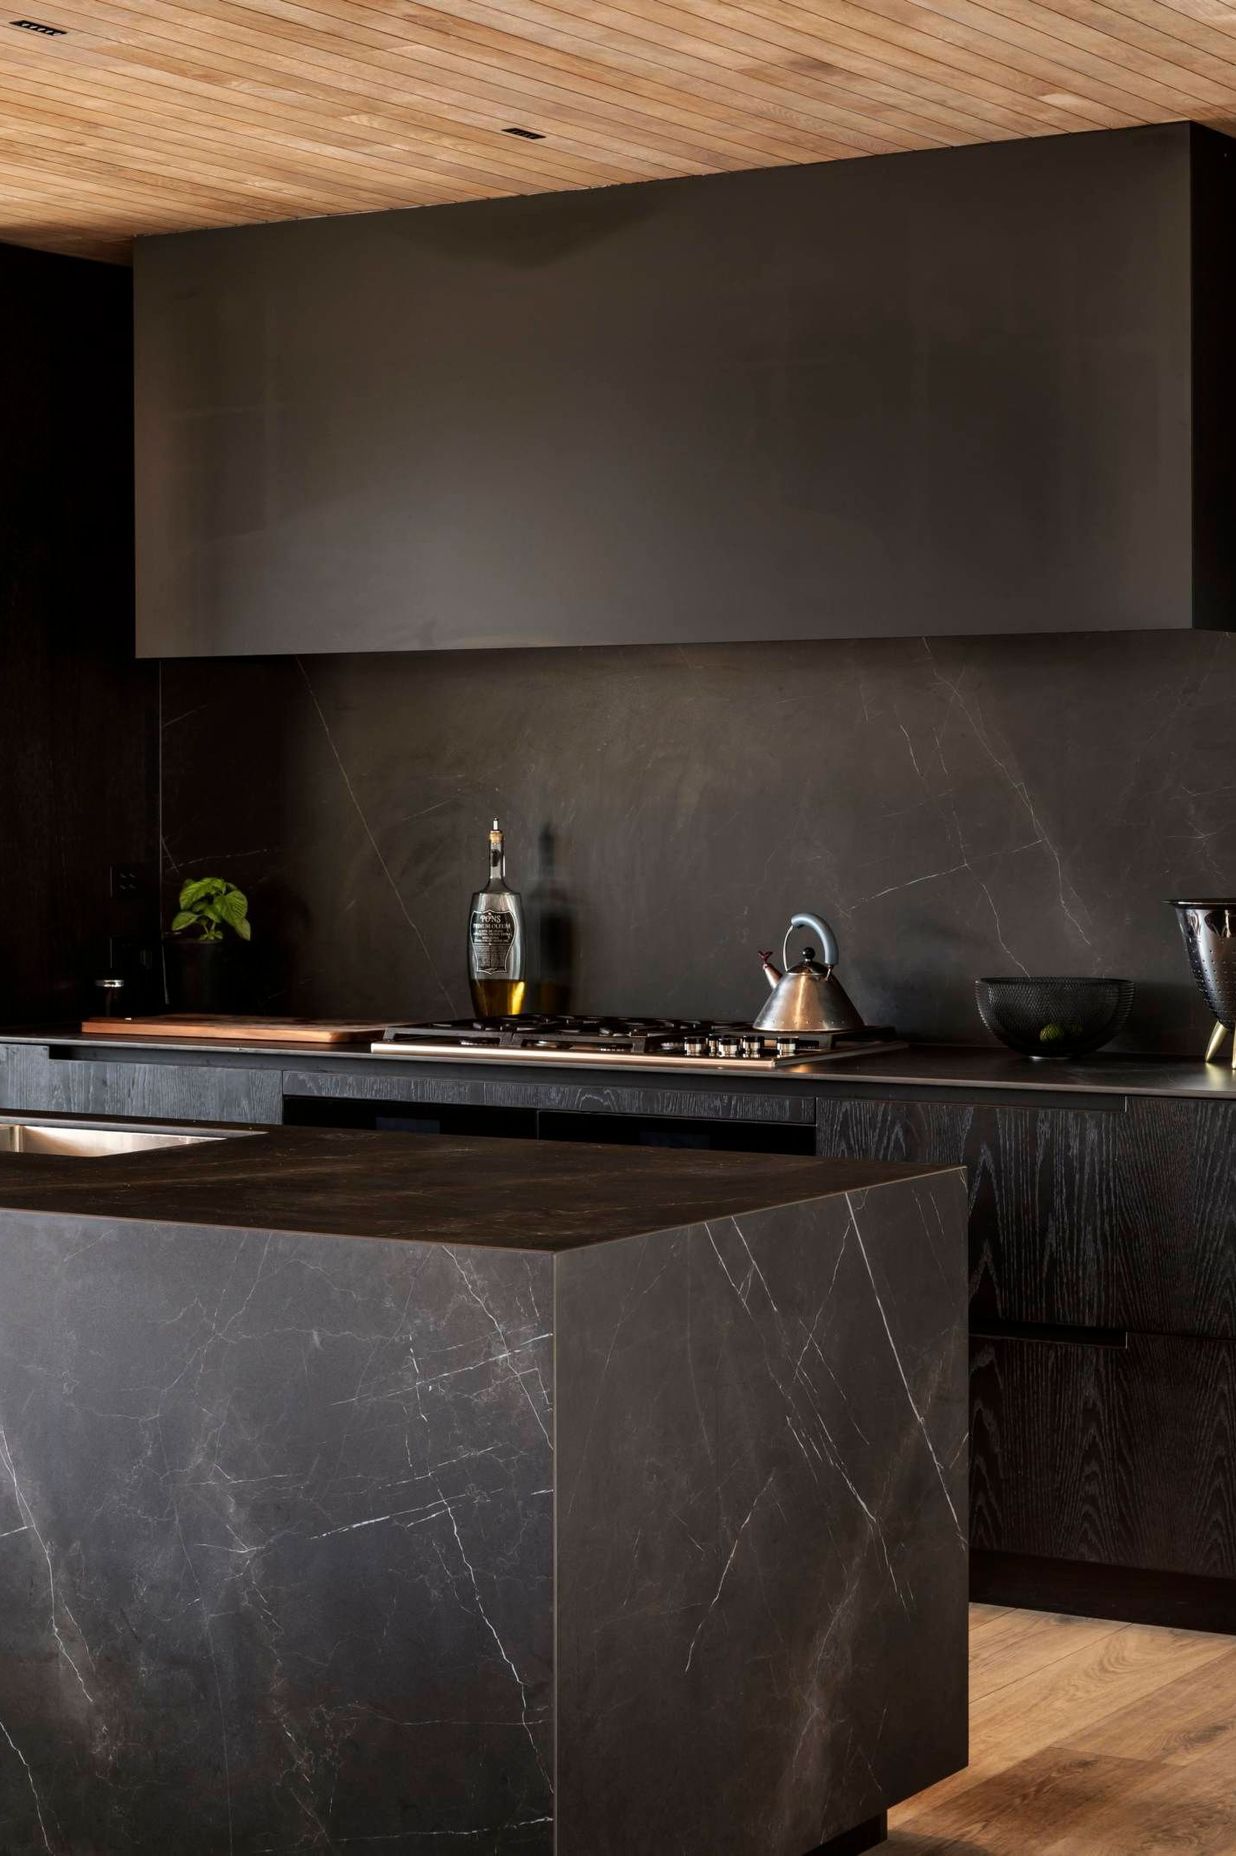 Kitchen designer Morgan Cronin set up a moody textural feel for the kitchen through tone-on-tone marble-effect porcelain and darkly stained oak.